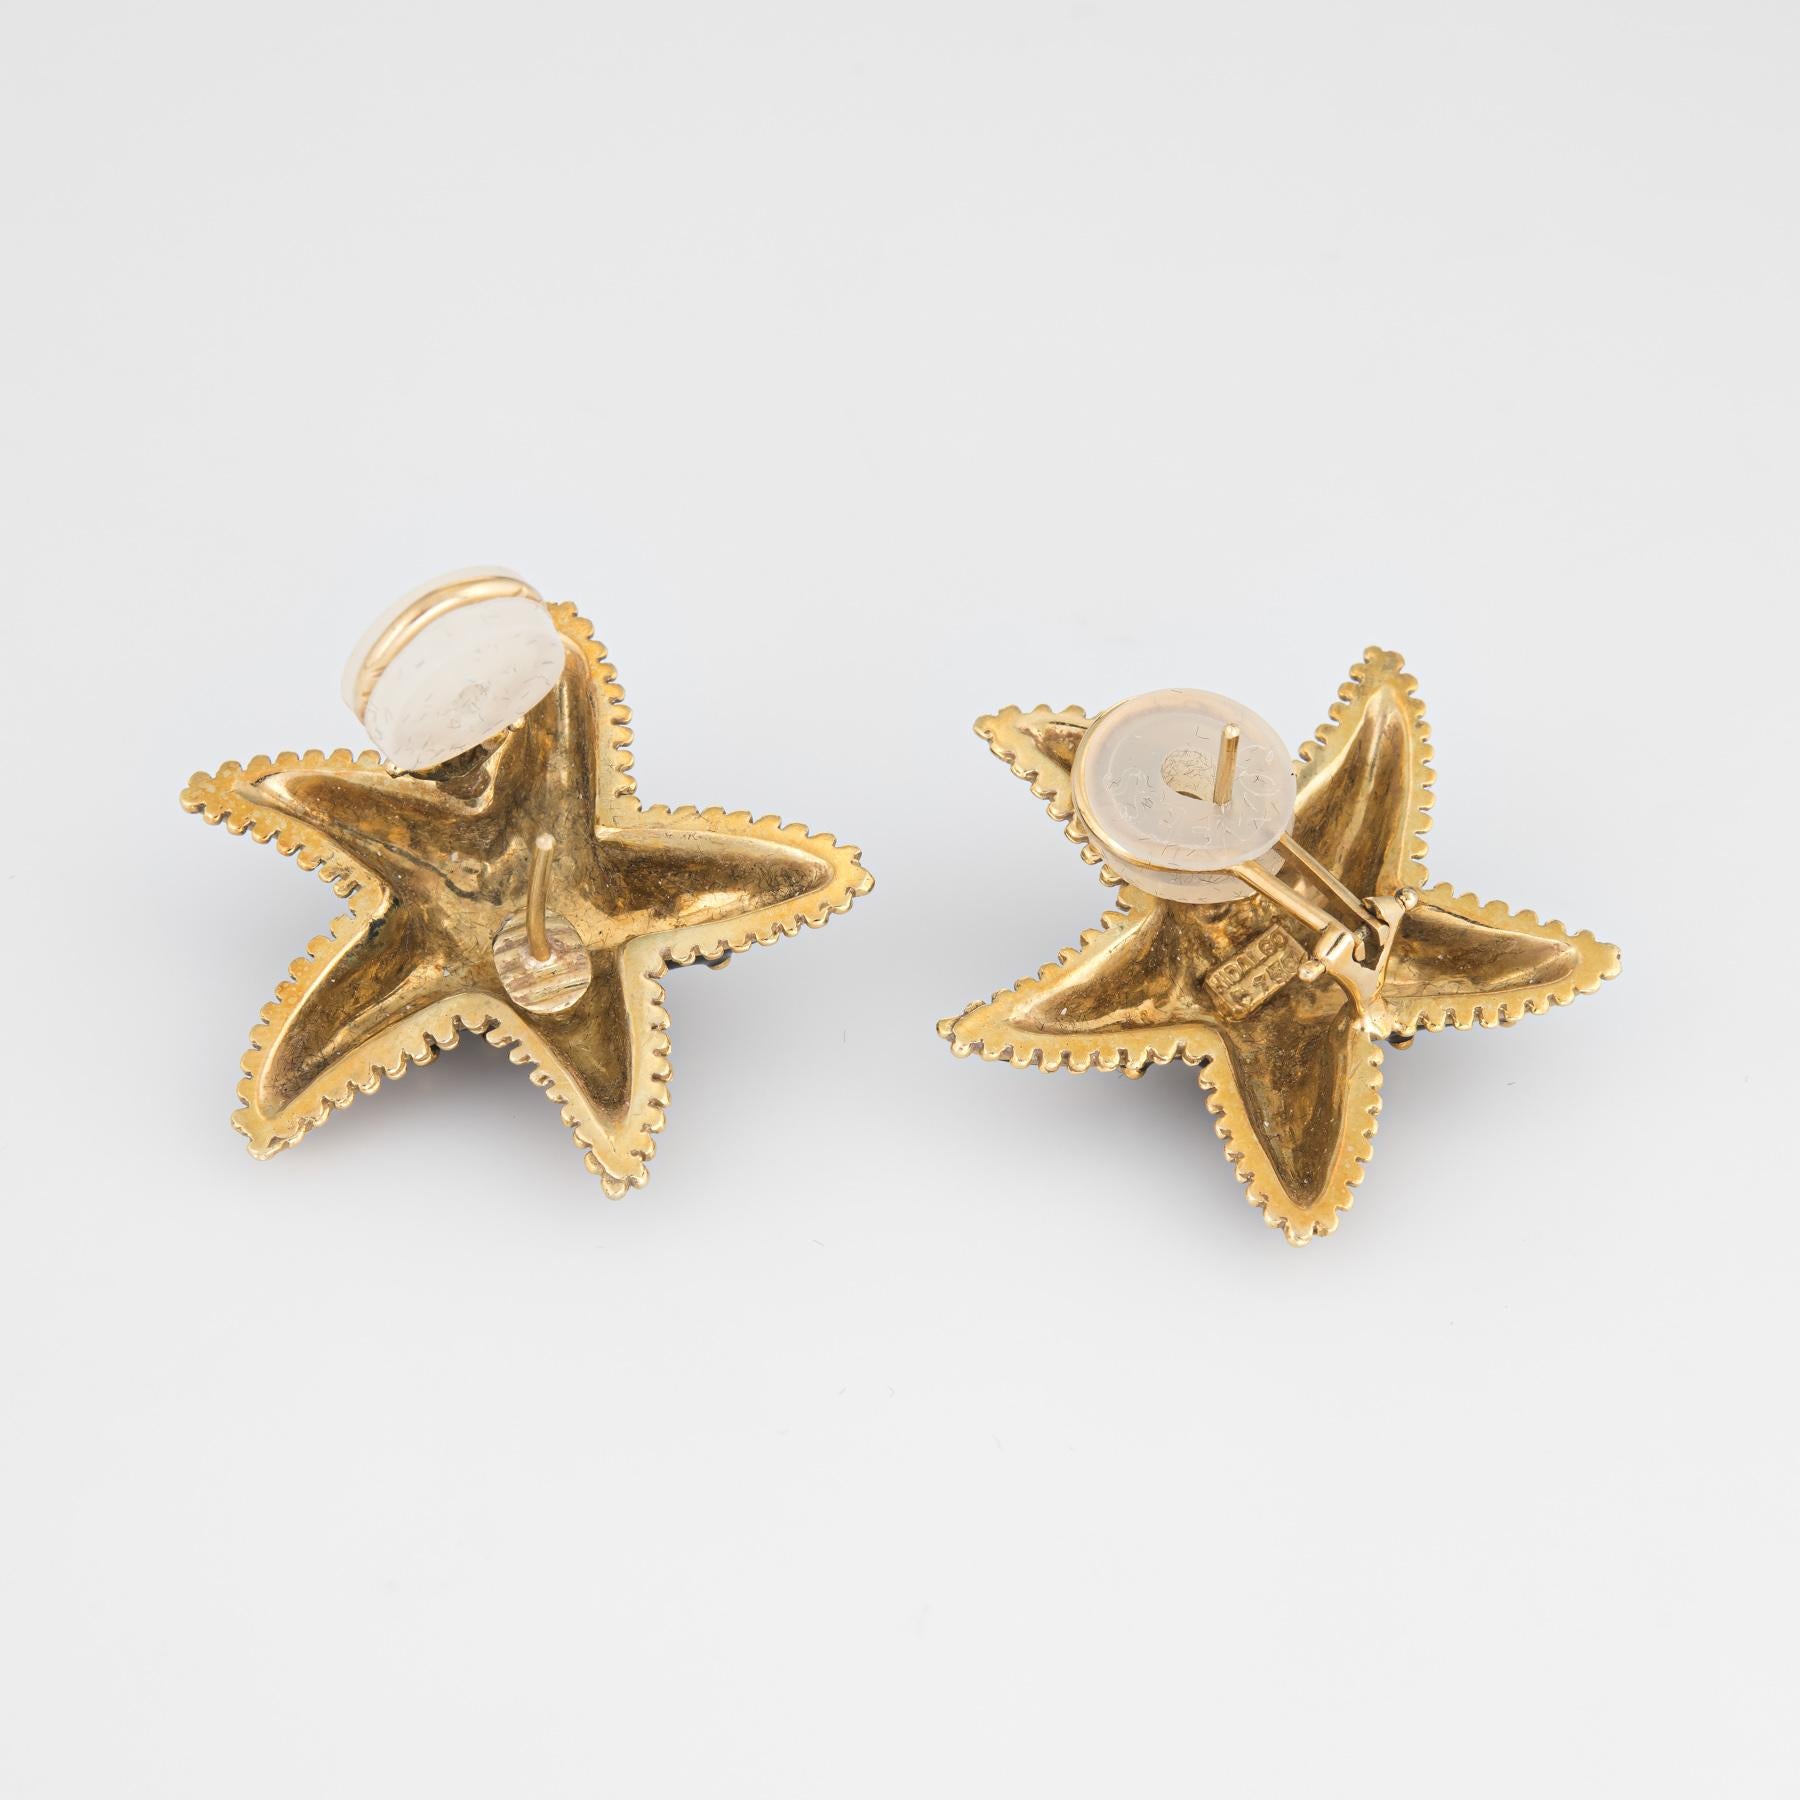 Finely detailed pair of estate Hidalgo starfish earrings, crafted in 18k yellow gold. 

The earrings retailed for an estimated $3,790.00.  

The charming earrings feature black enamel set into the pierced starfish design. The stylish earrings can